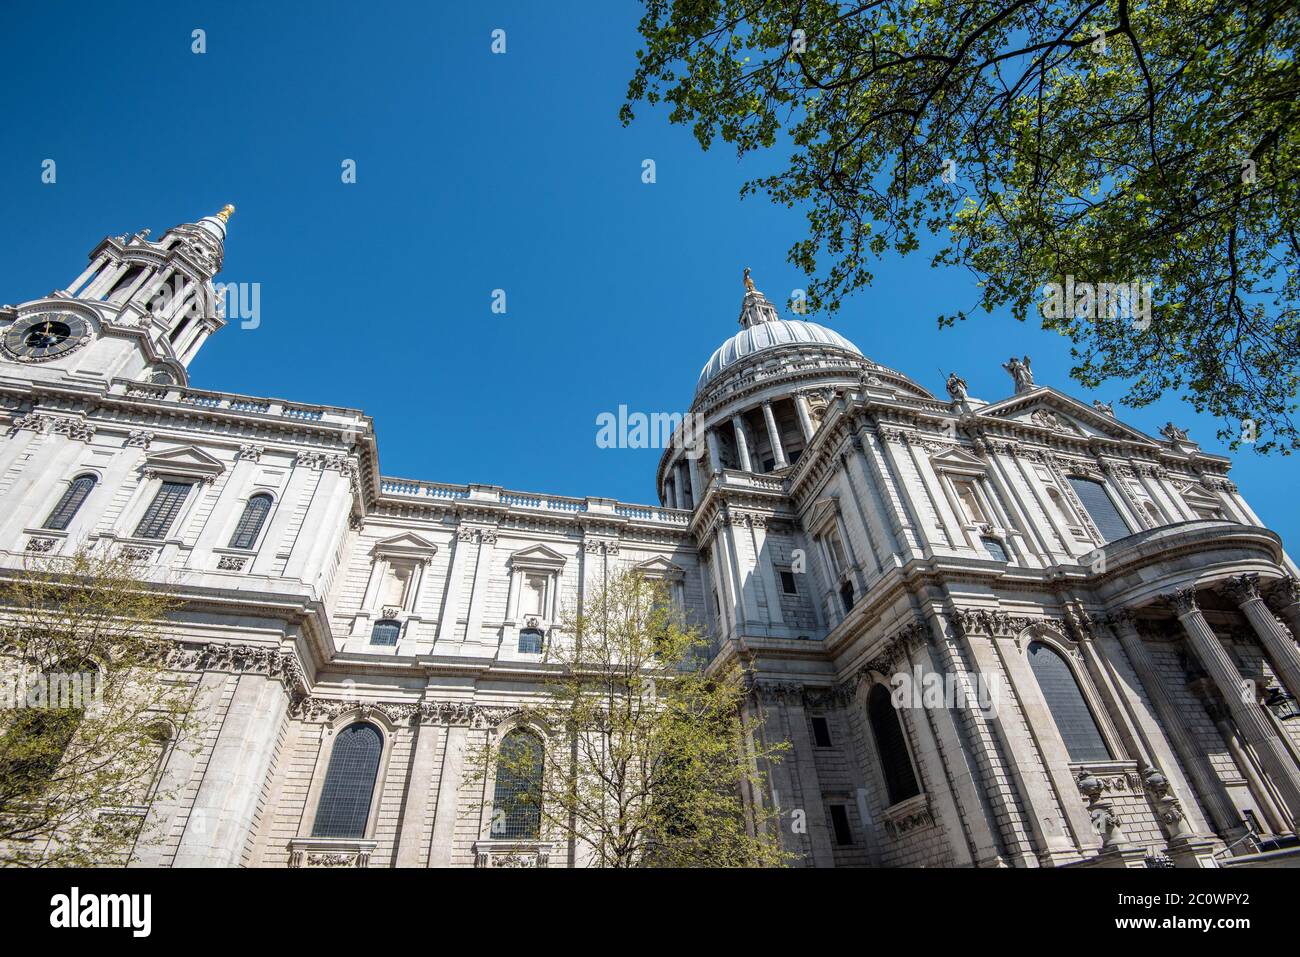 St Paul's Cathedral, London, England. Stock Photo